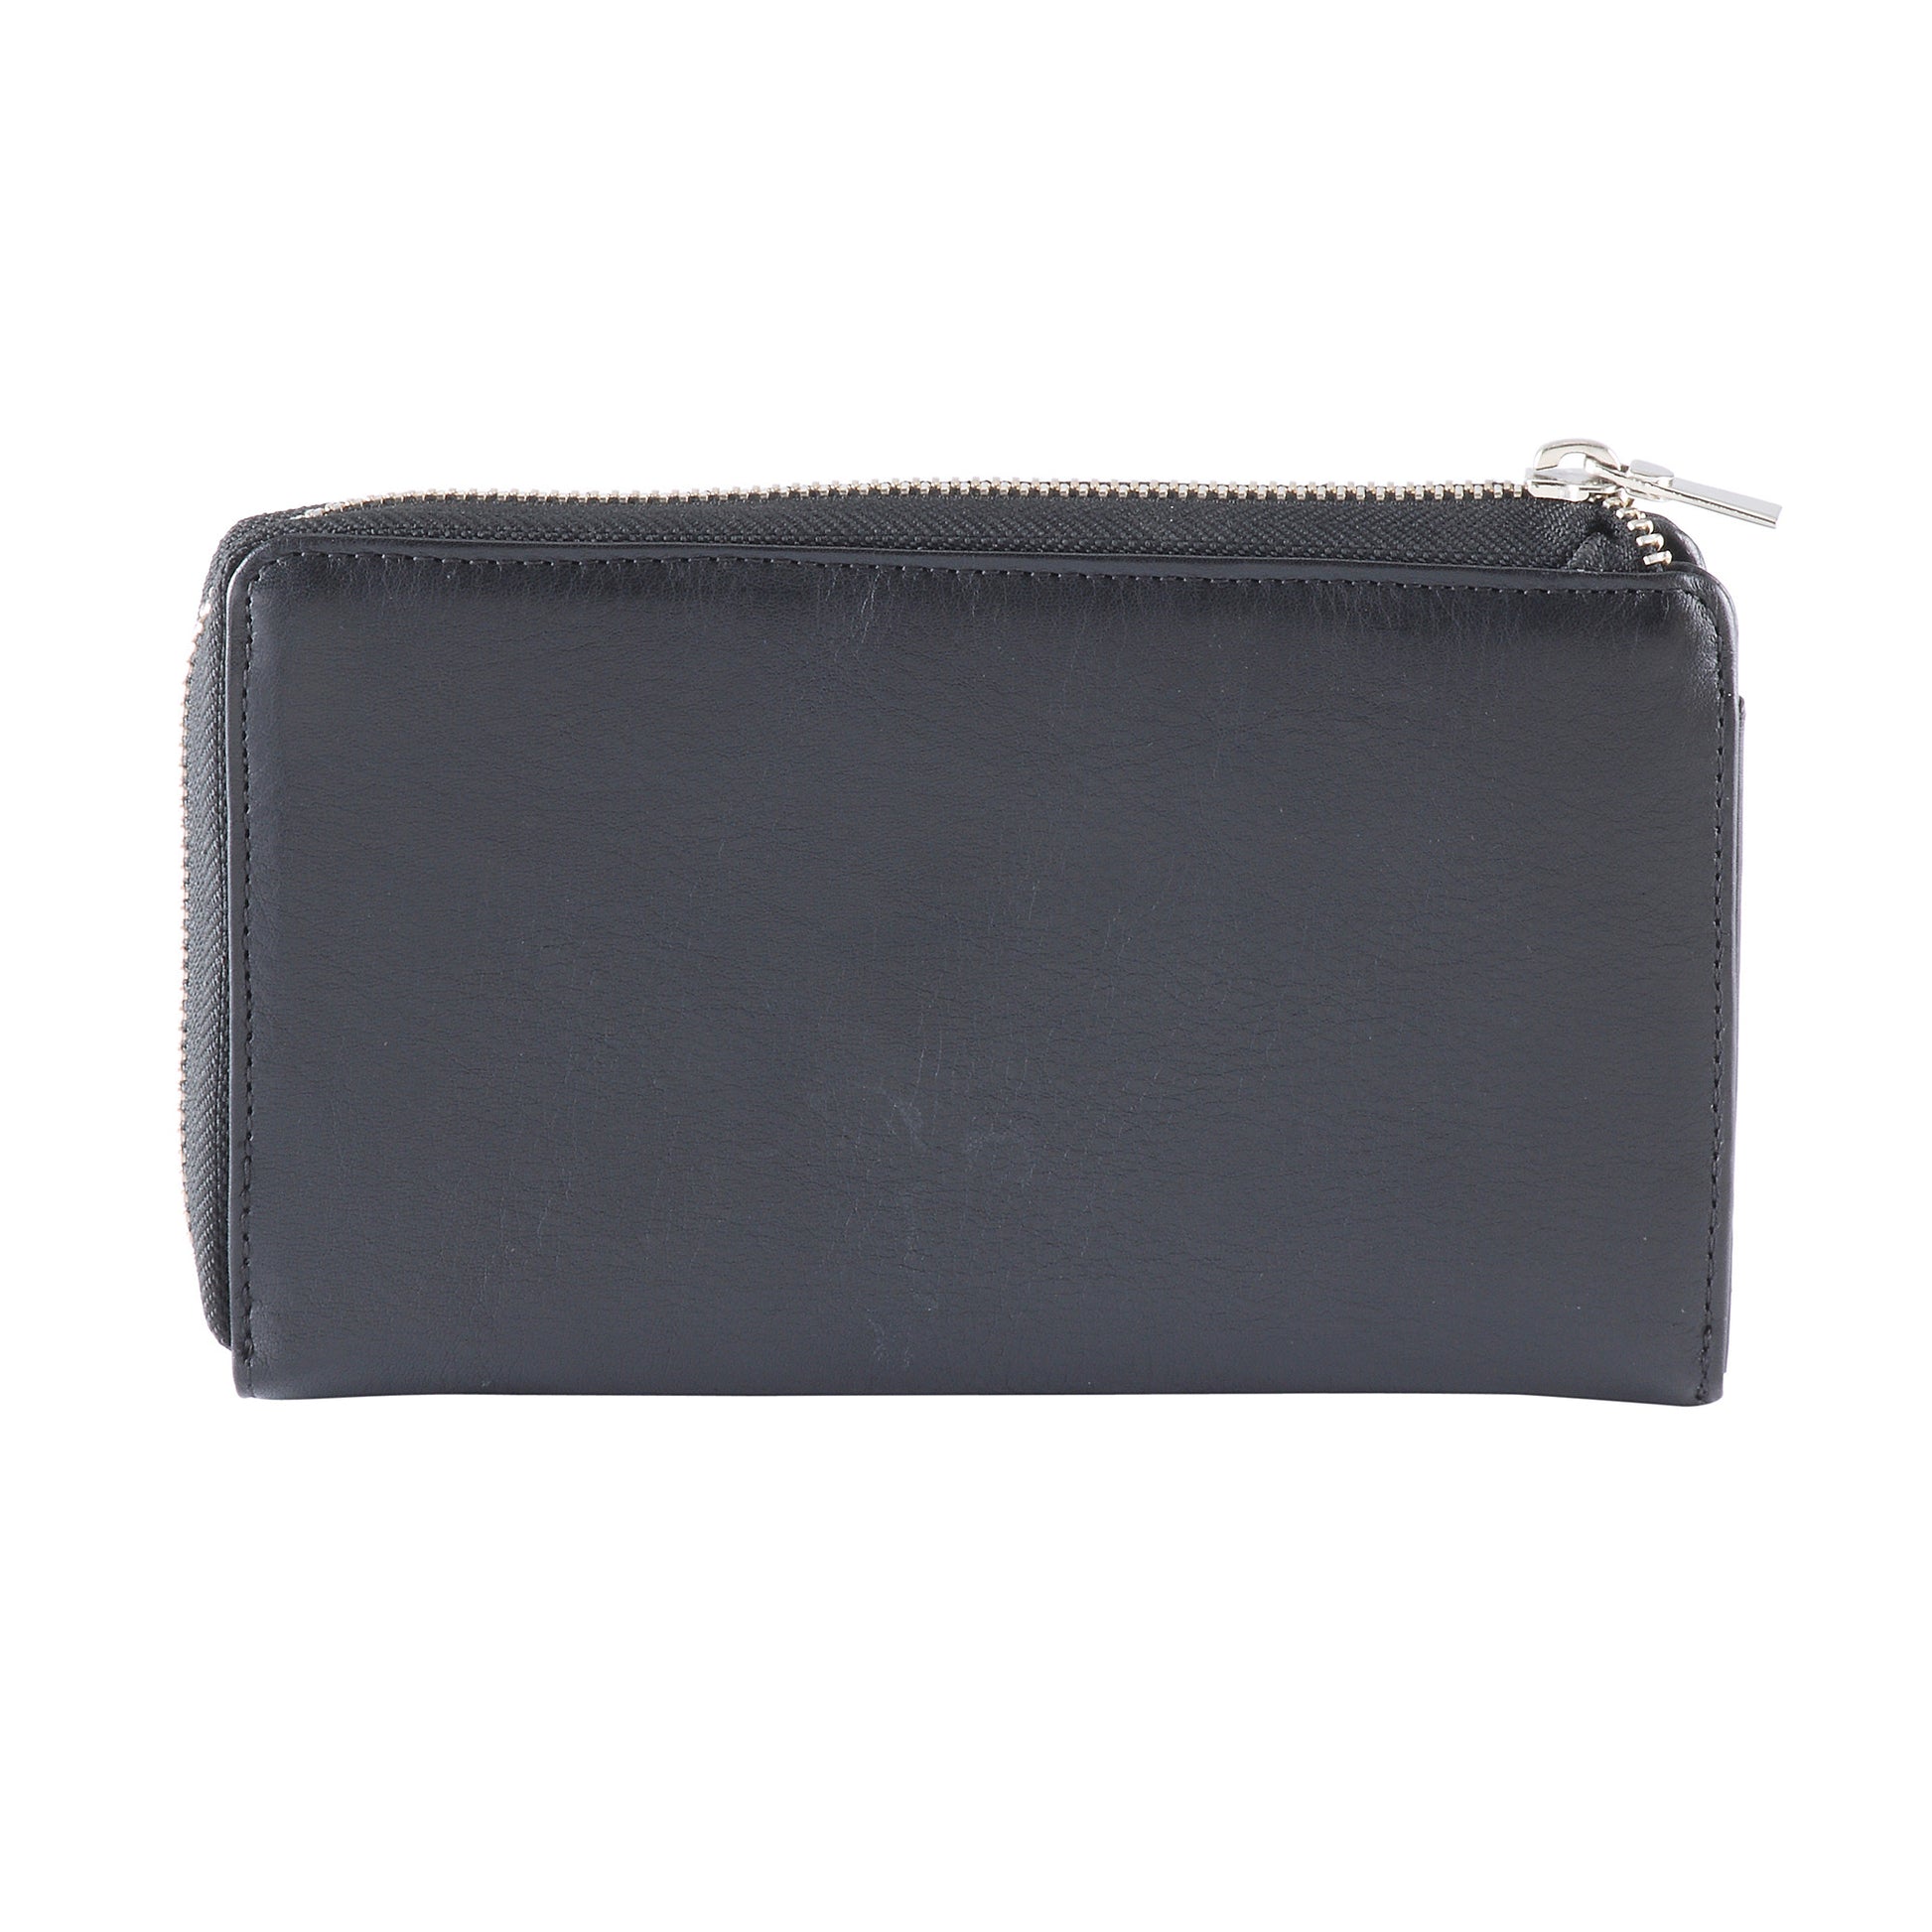 Style n Craft 301966-BL Ladies Zippered Clutch Wallet in Black Cow Leather - back closed